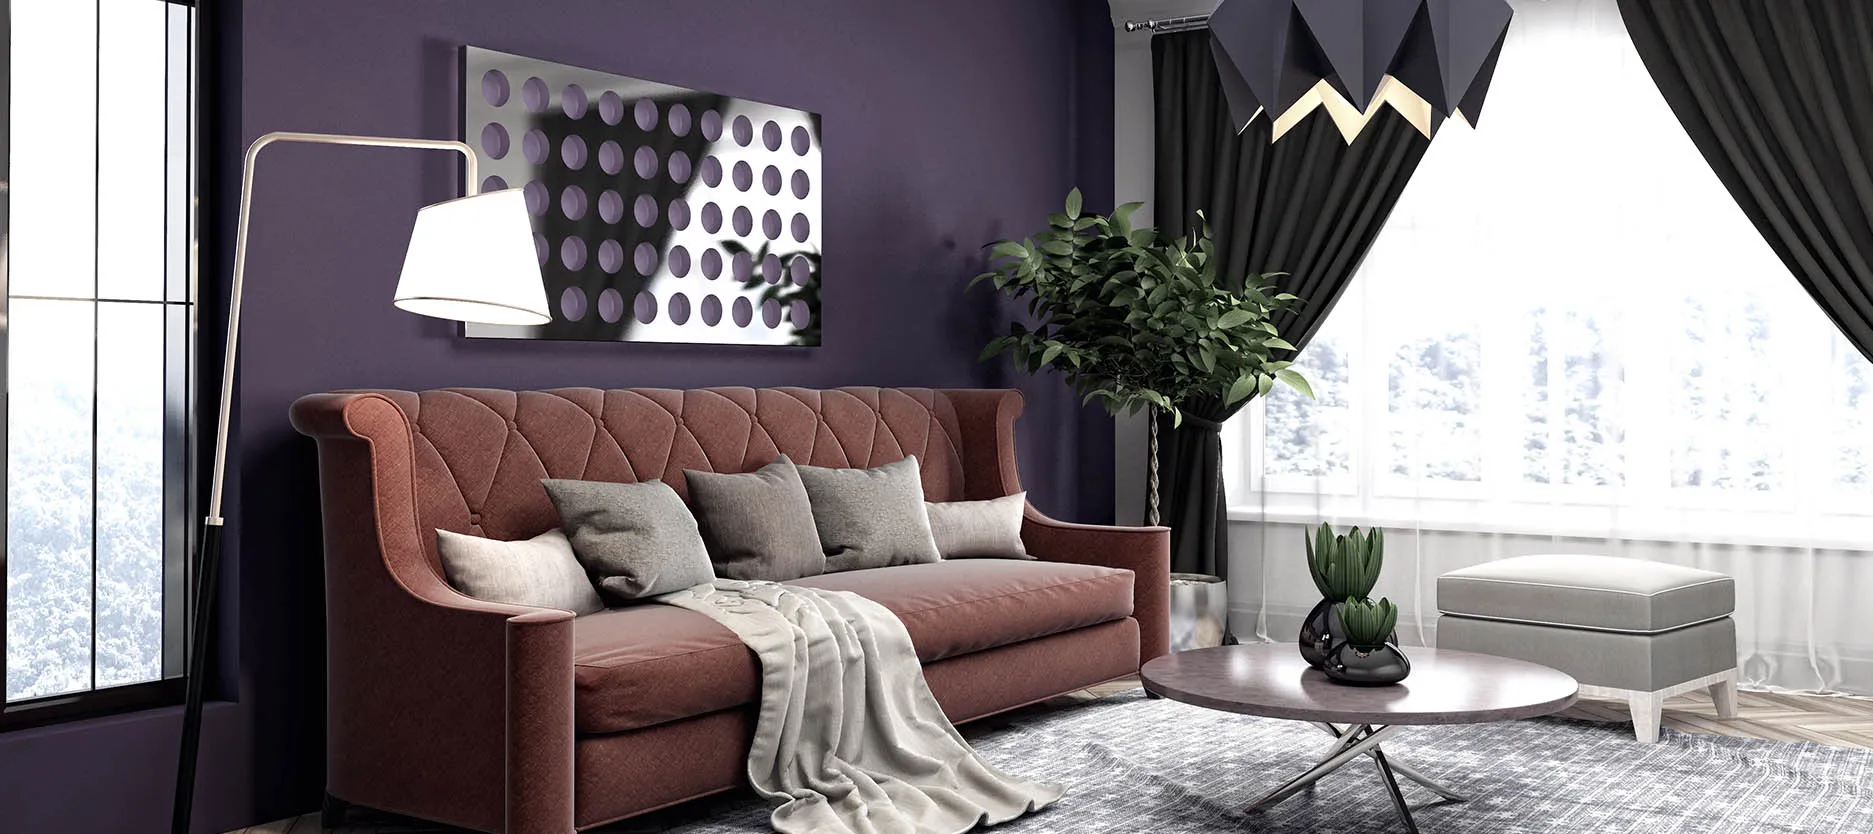 Violet and ivory double colour combination sets up a stimulating environment for your bedroom walls